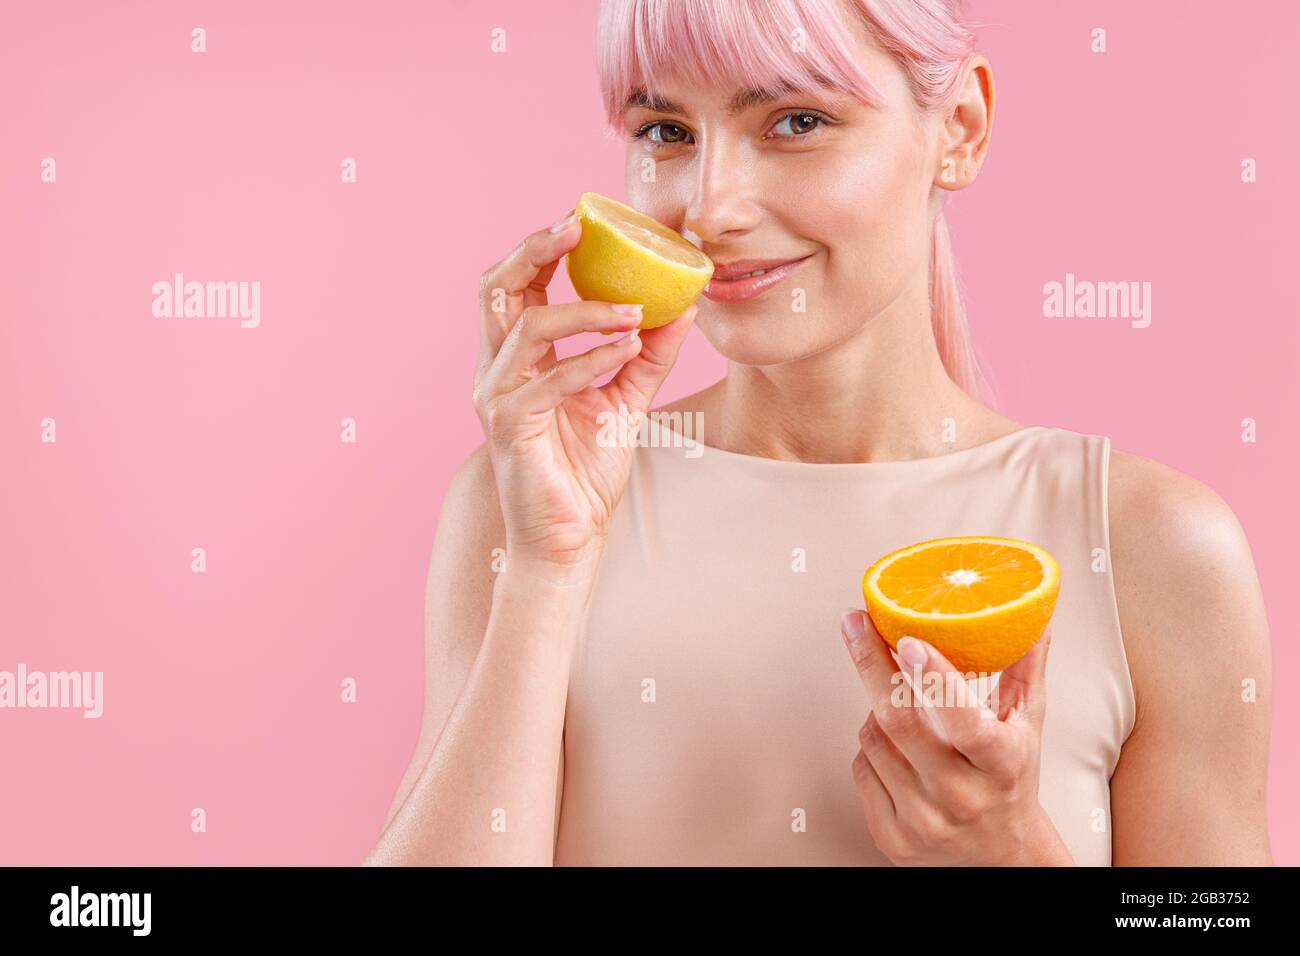 Portrait of smiling woman with pink hair holding half of ripe orange and smelling fresh lemon, posing isolated over pink background Stock Photo